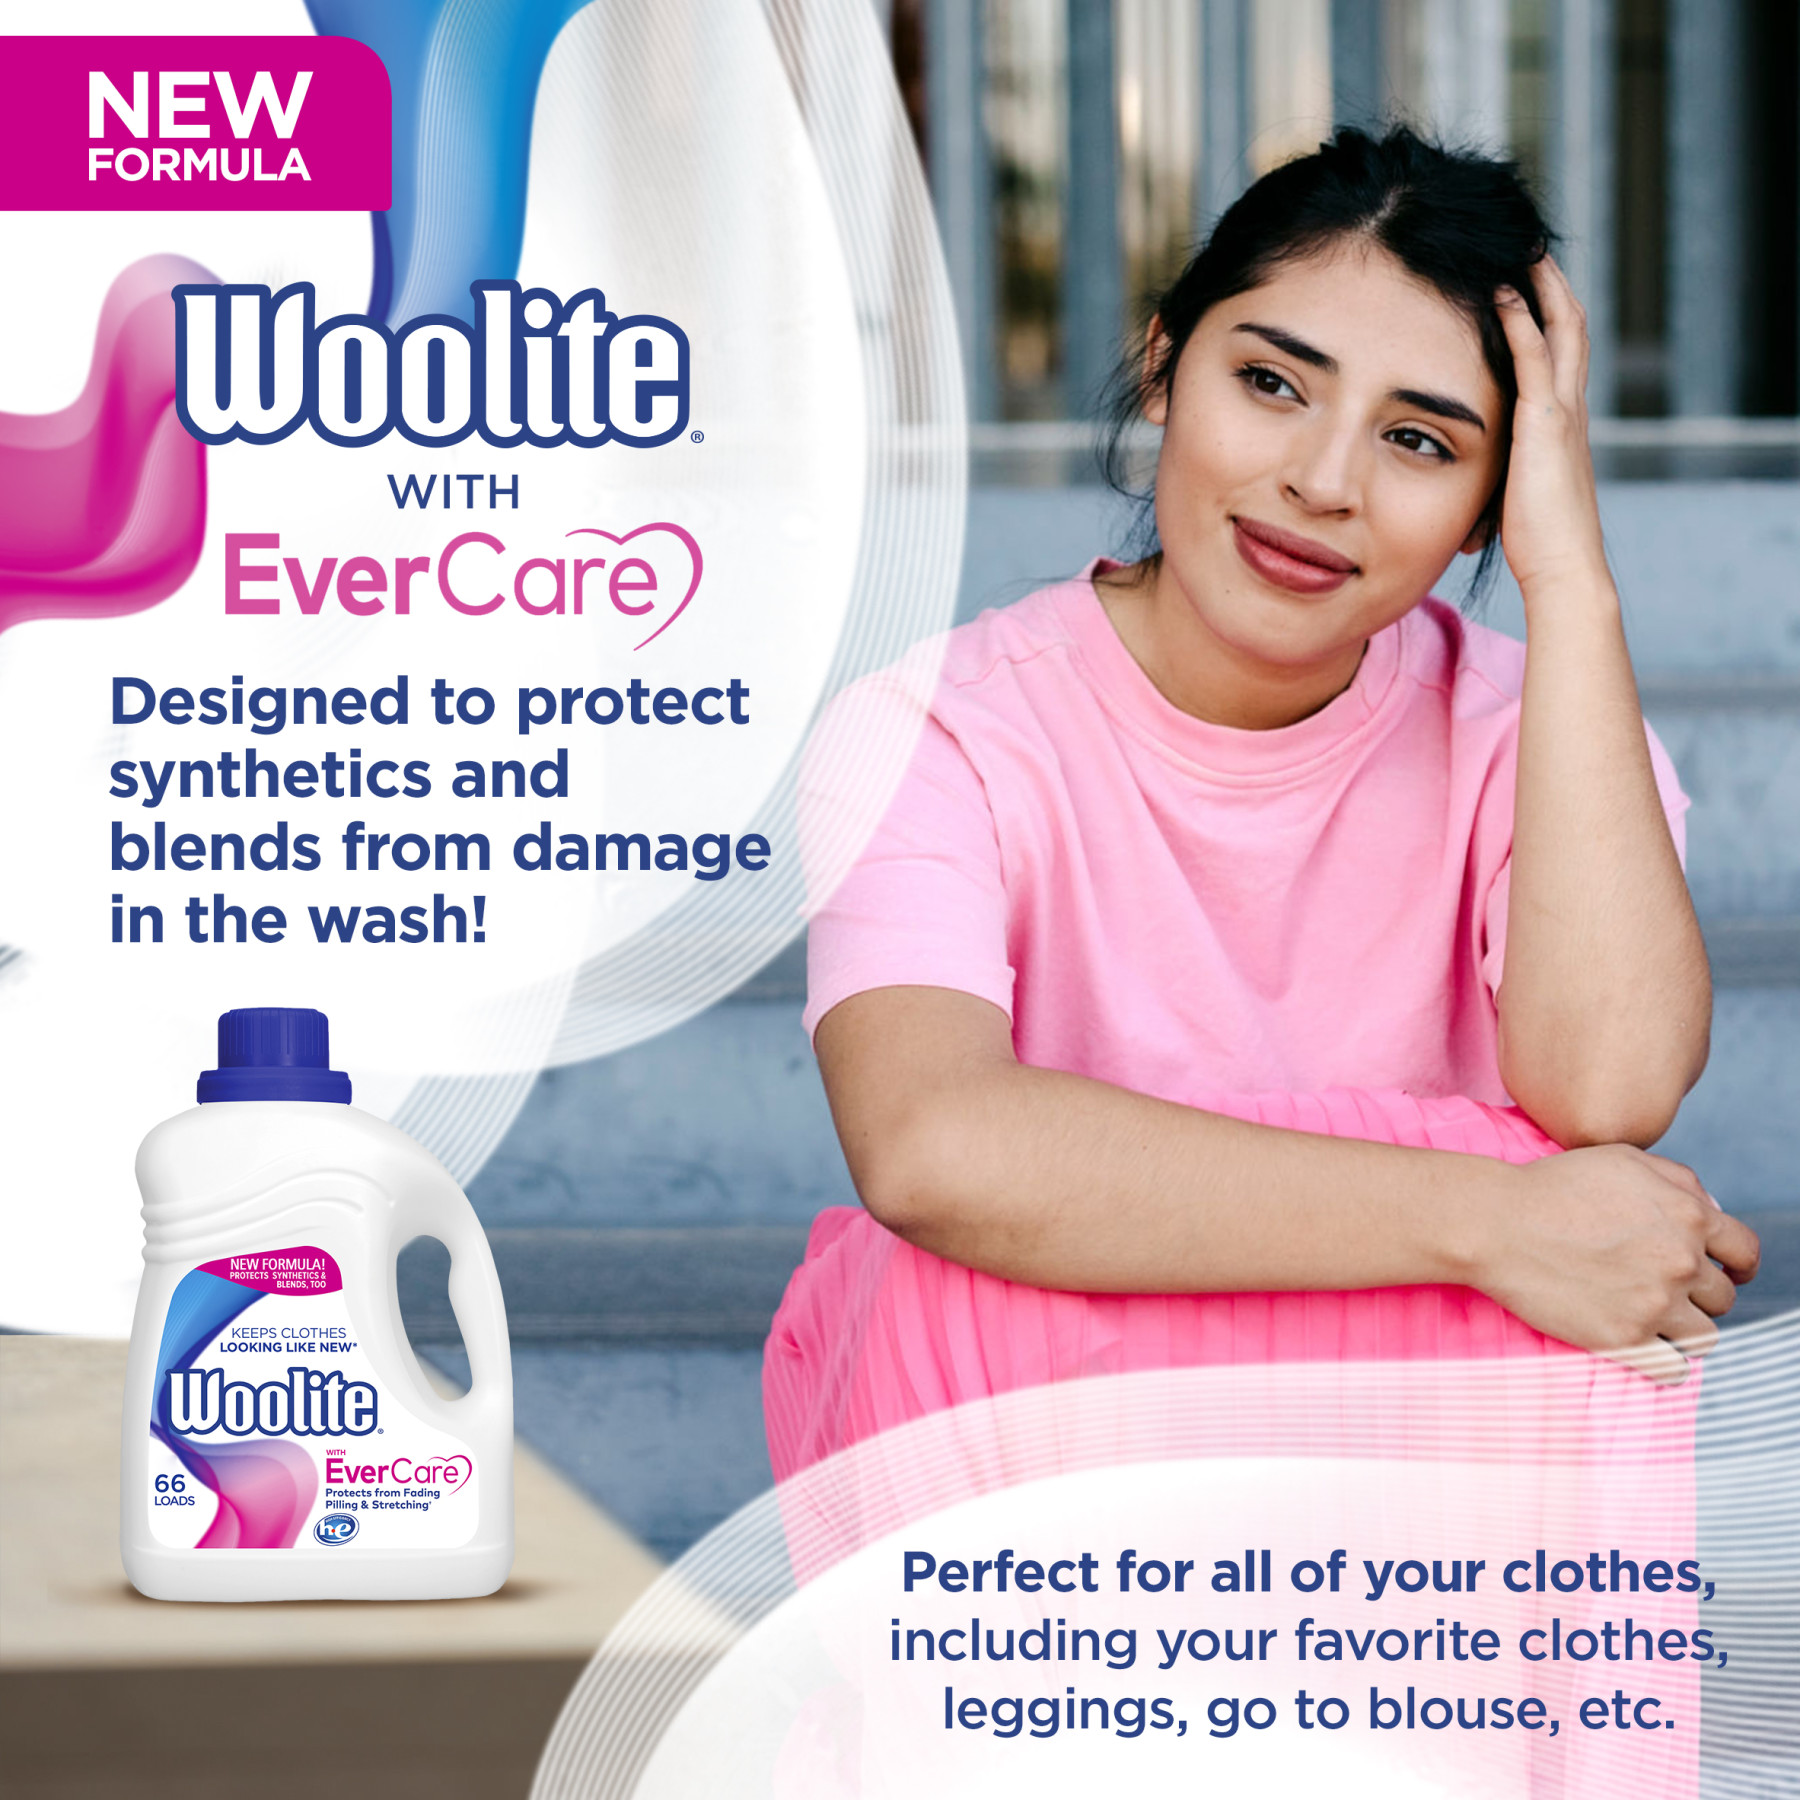 Woolite All Clothes Liquid Laundry Detergent, Sparkling Falls Scent, 83 Loads , 125oz, Regular & HE Washers, Gentle Cycle, , Packaging May Vary - image 2 of 6